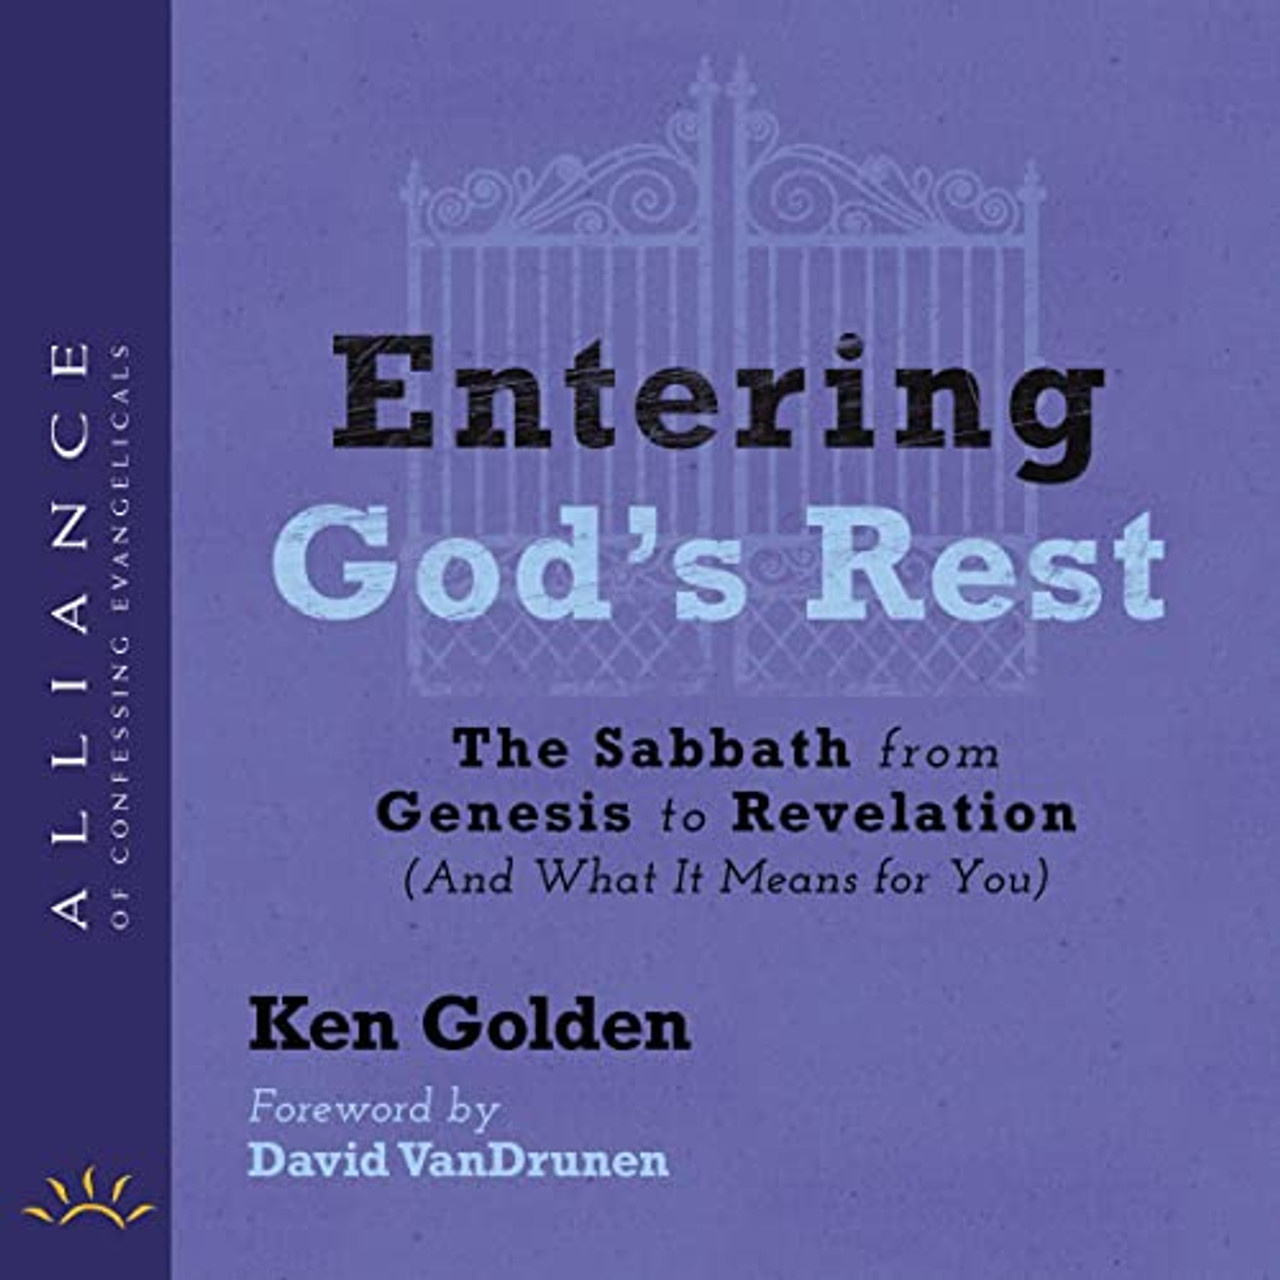 Entering God's Rest: The Sabbath from Genesis to Revelation—And What It Means for You (audiobook)